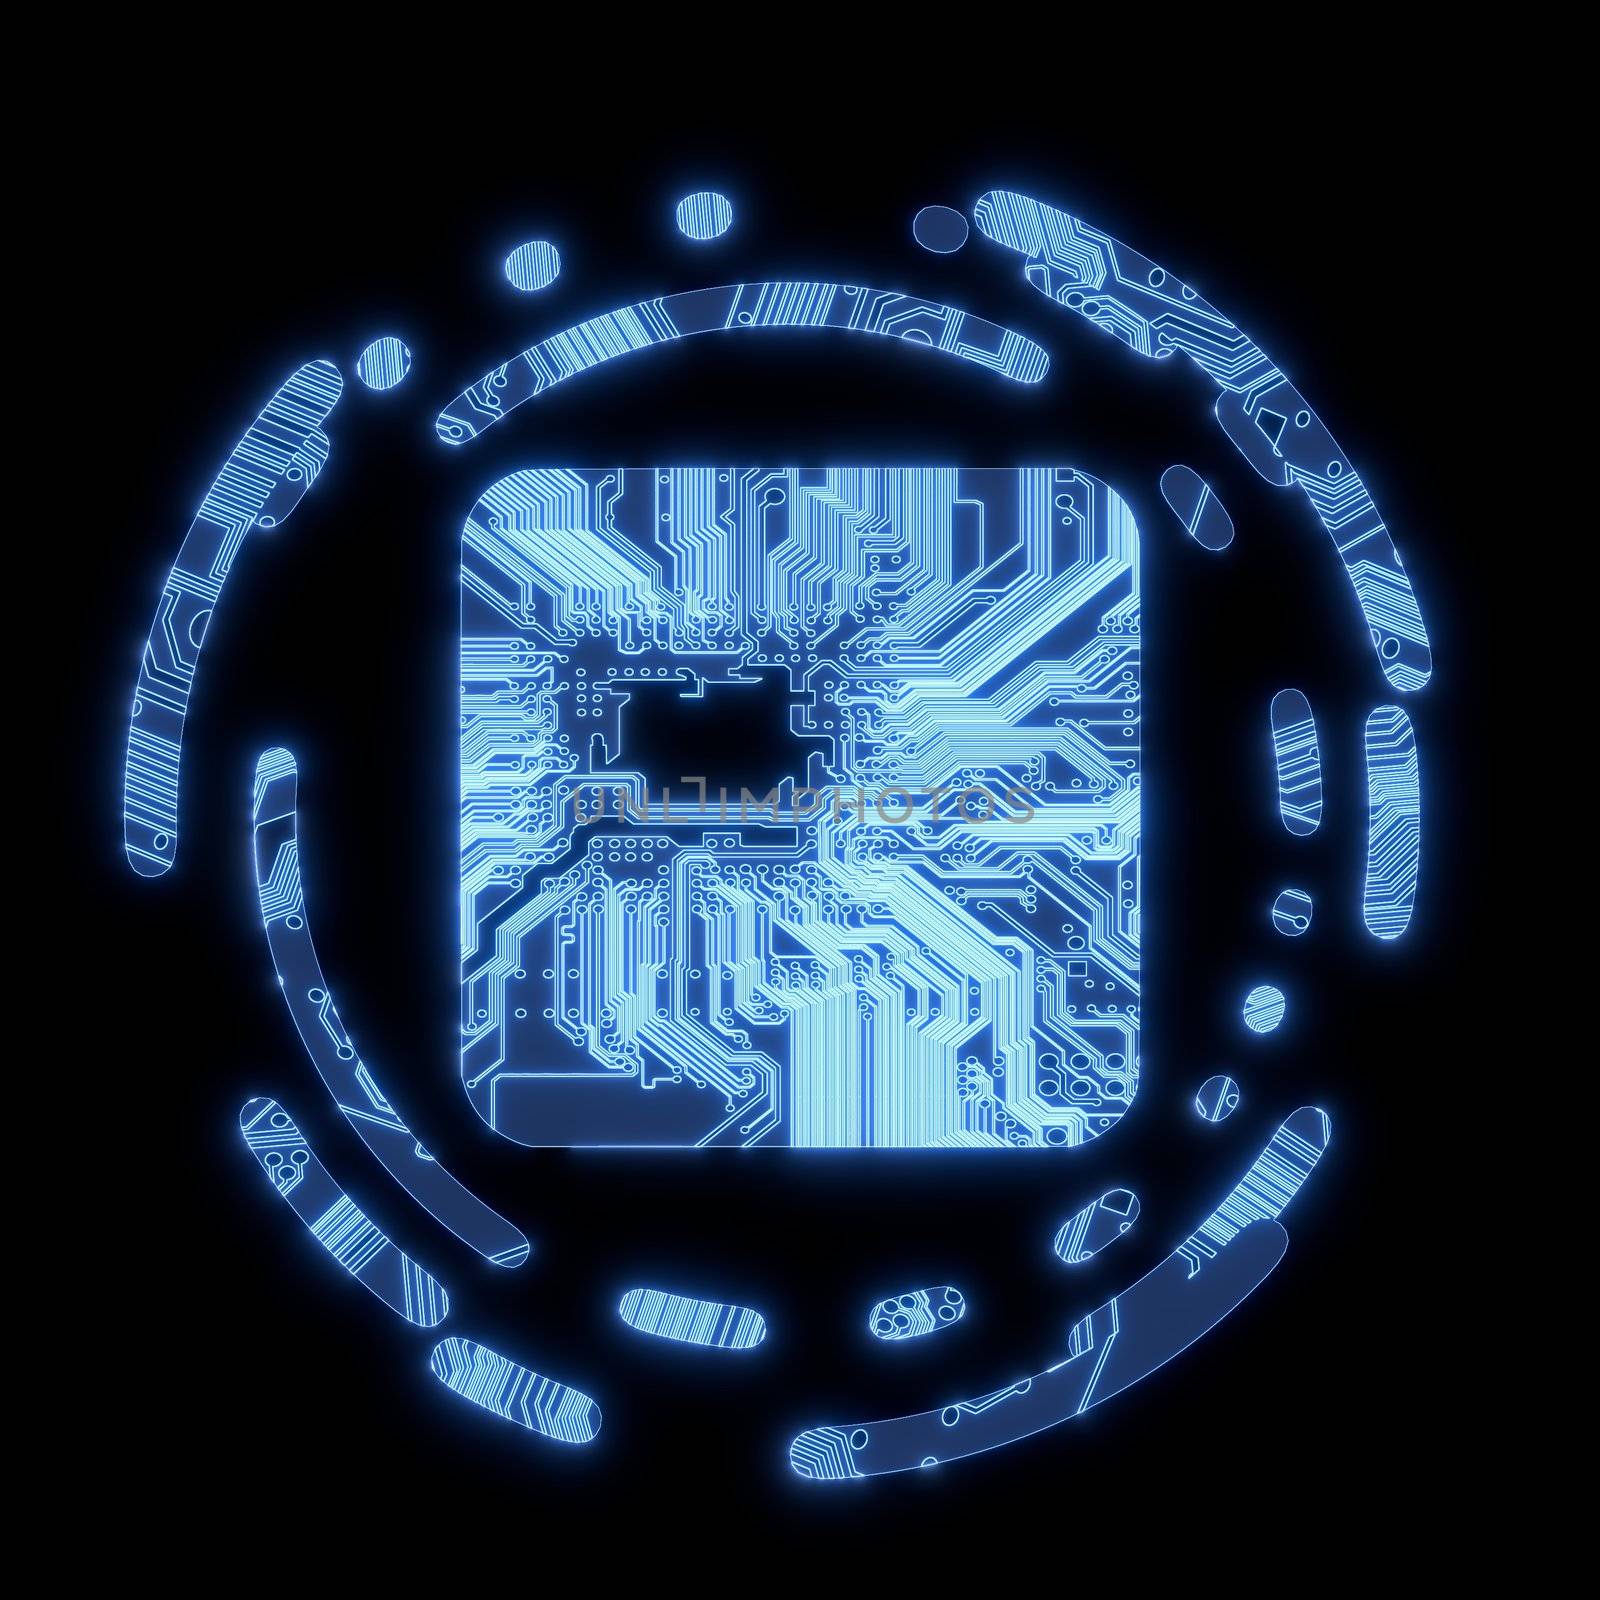 Illuminated blue computer rectangle on a computer chip by onirb